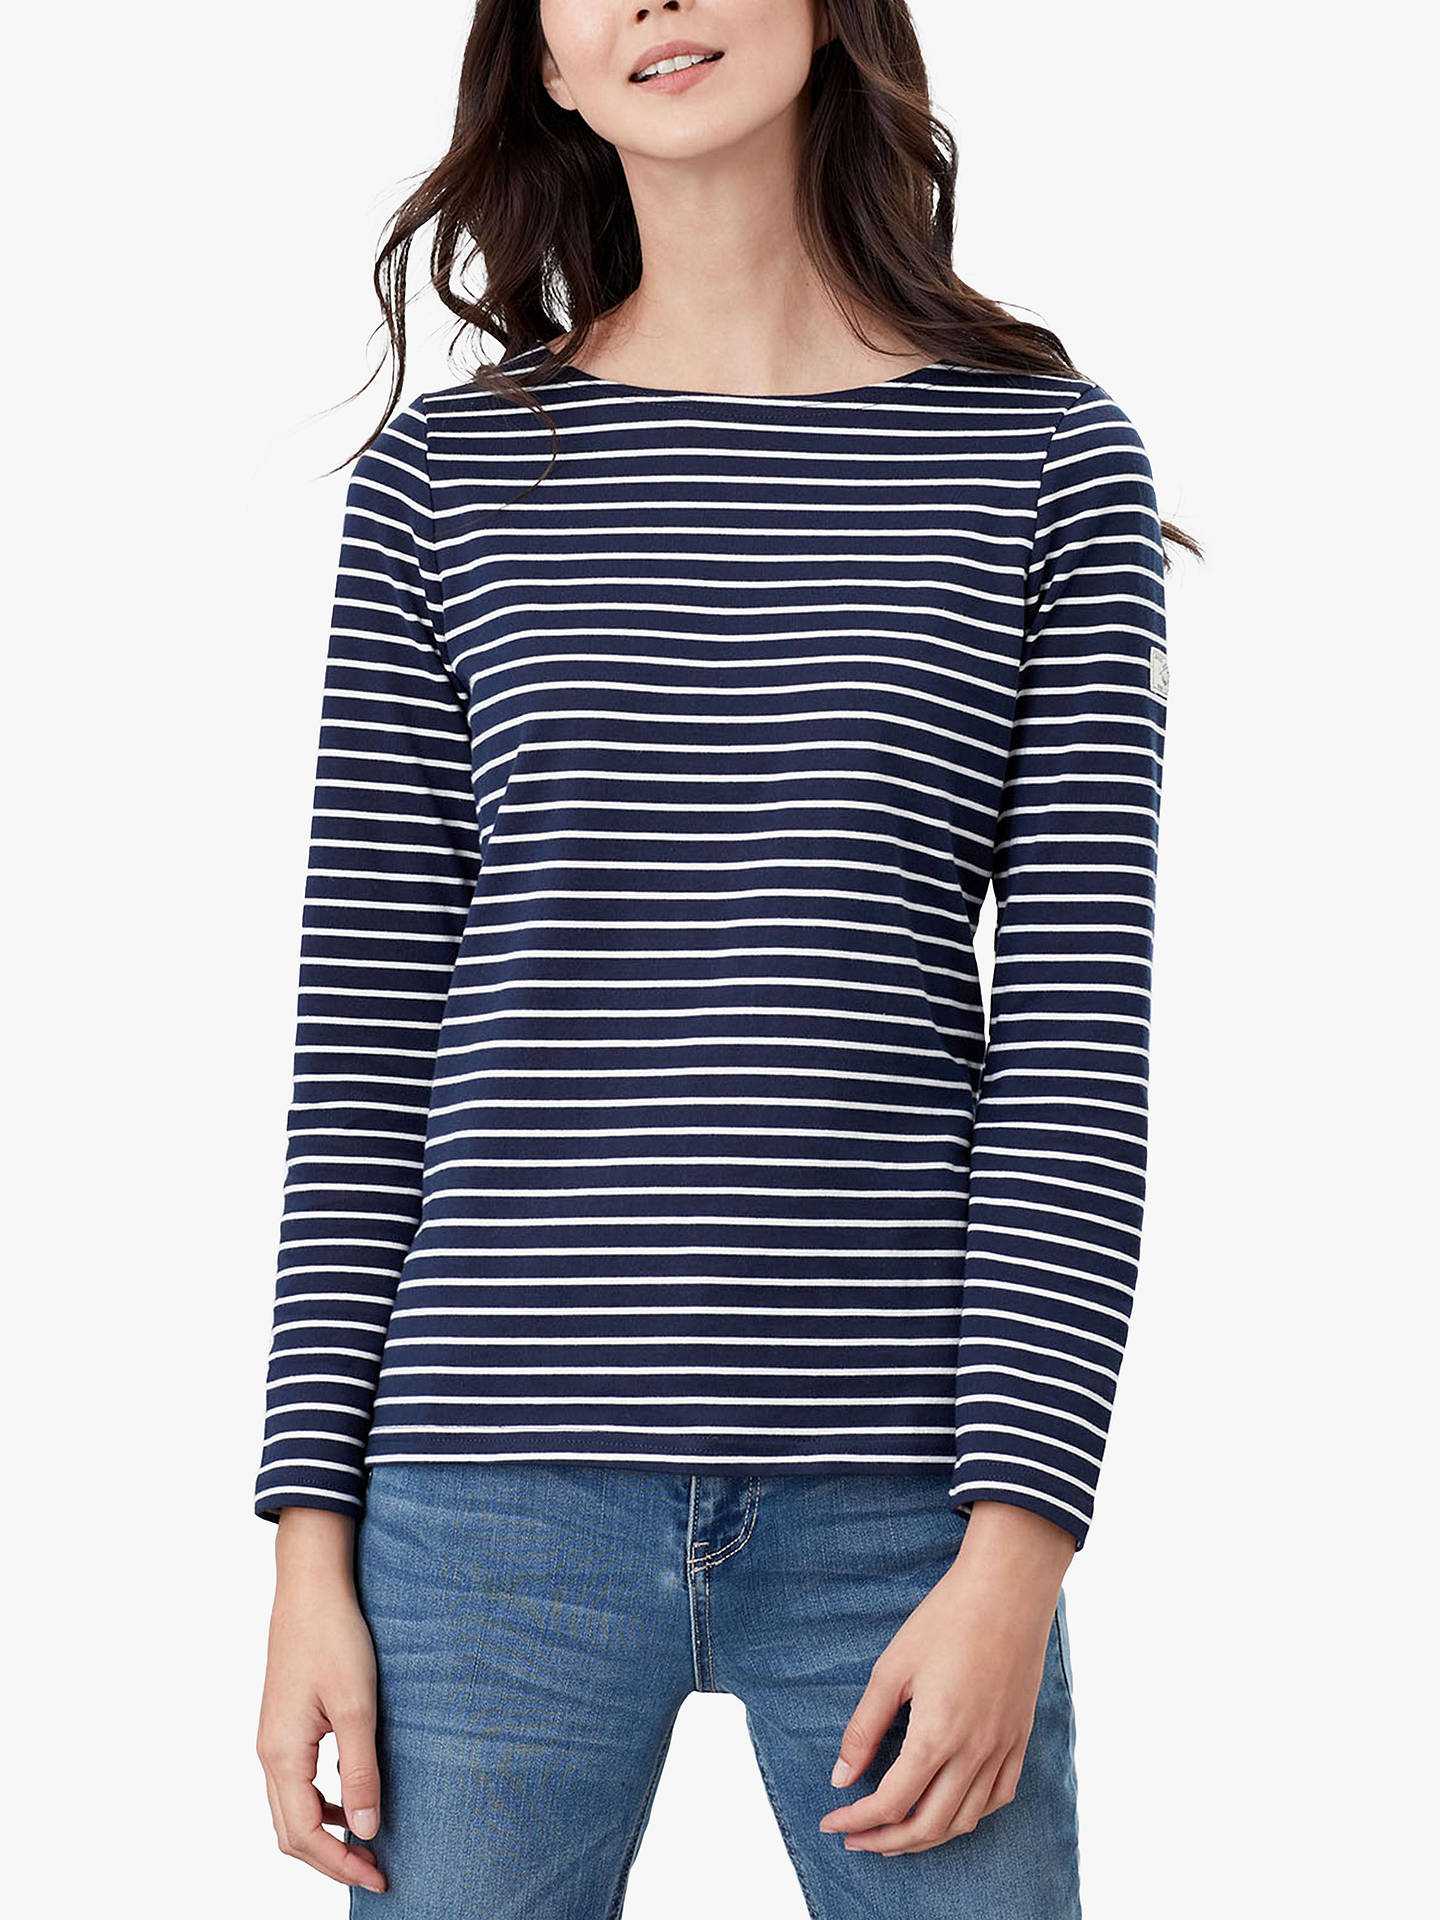 Joules Harbour Stripe Jersey Top, Navy/Cream at John Lewis & Partners